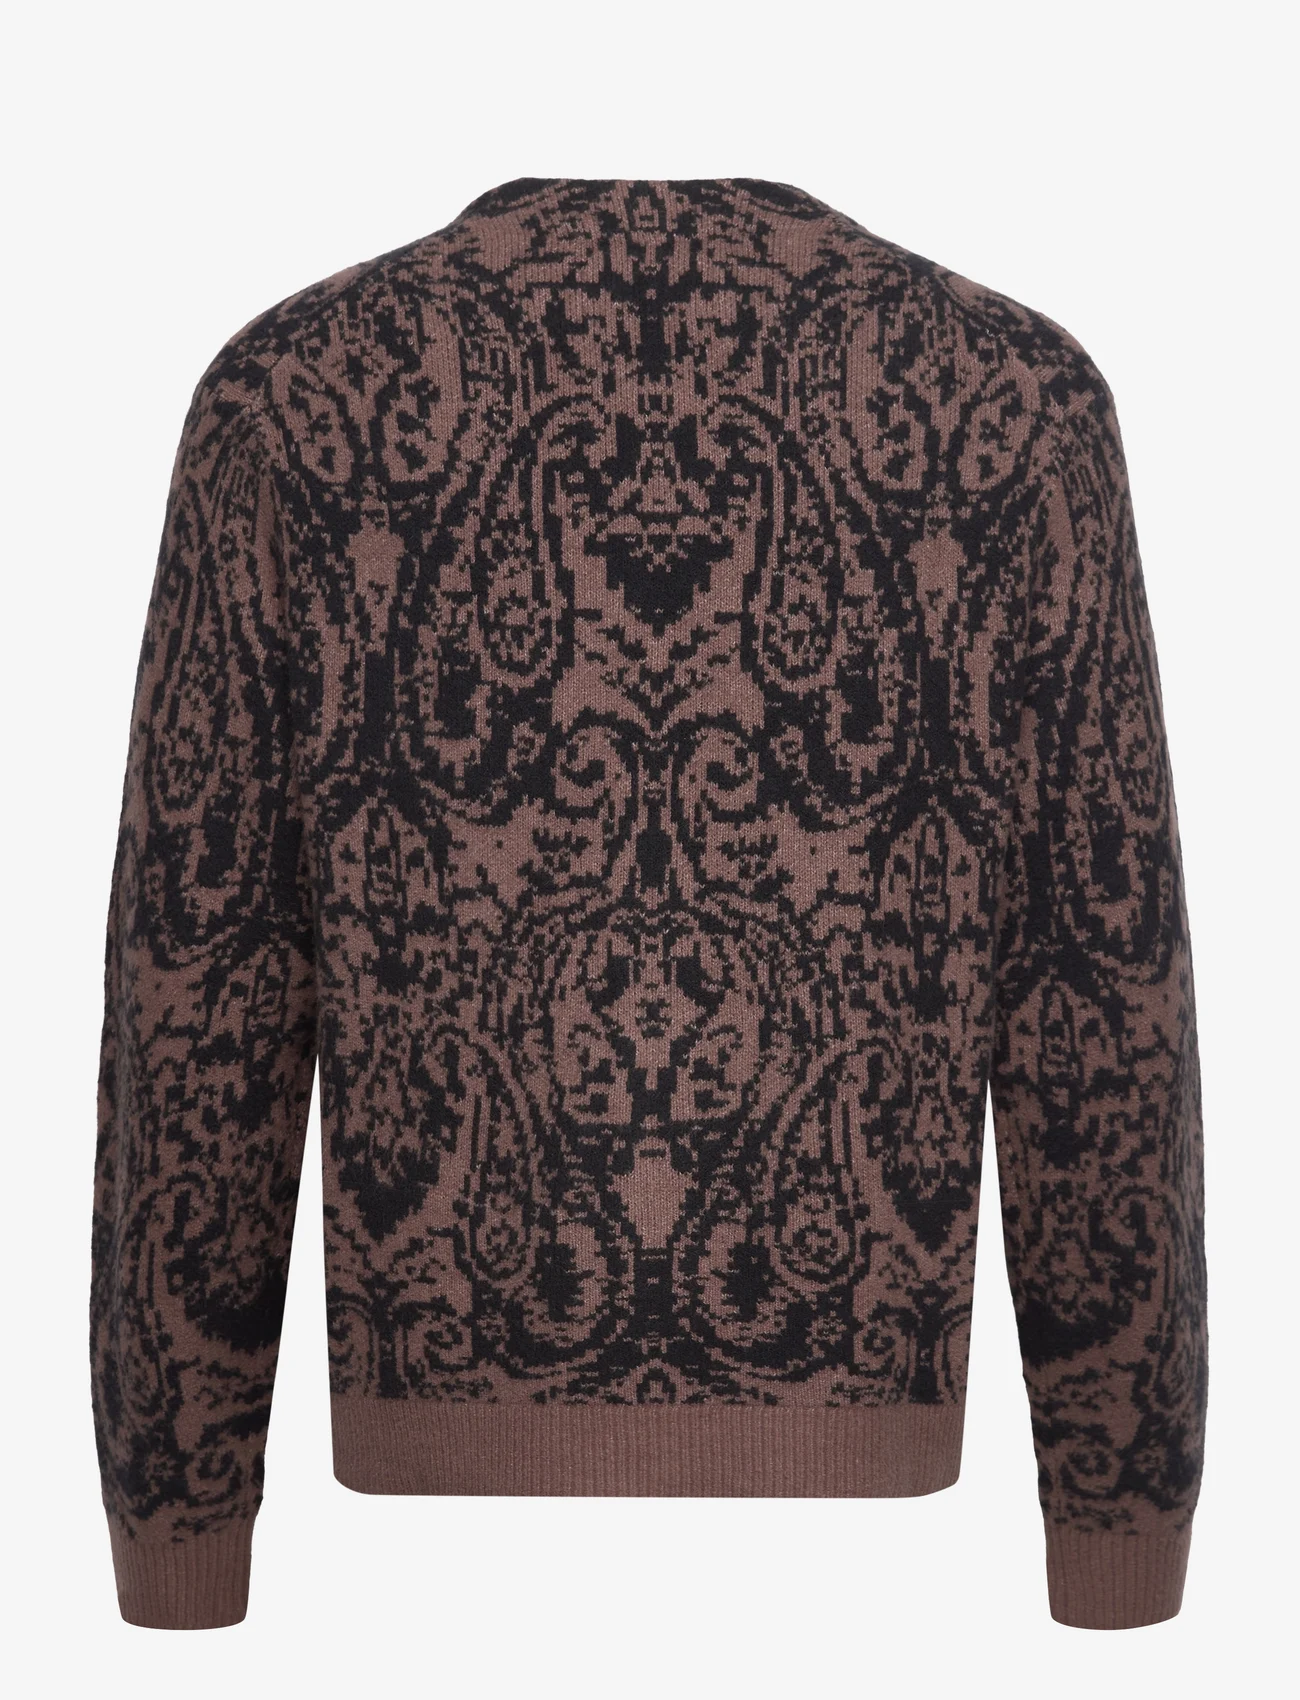 Abercrombie & Fitch - ANF MENS SWEATERS - koftor - brown pattern - 1